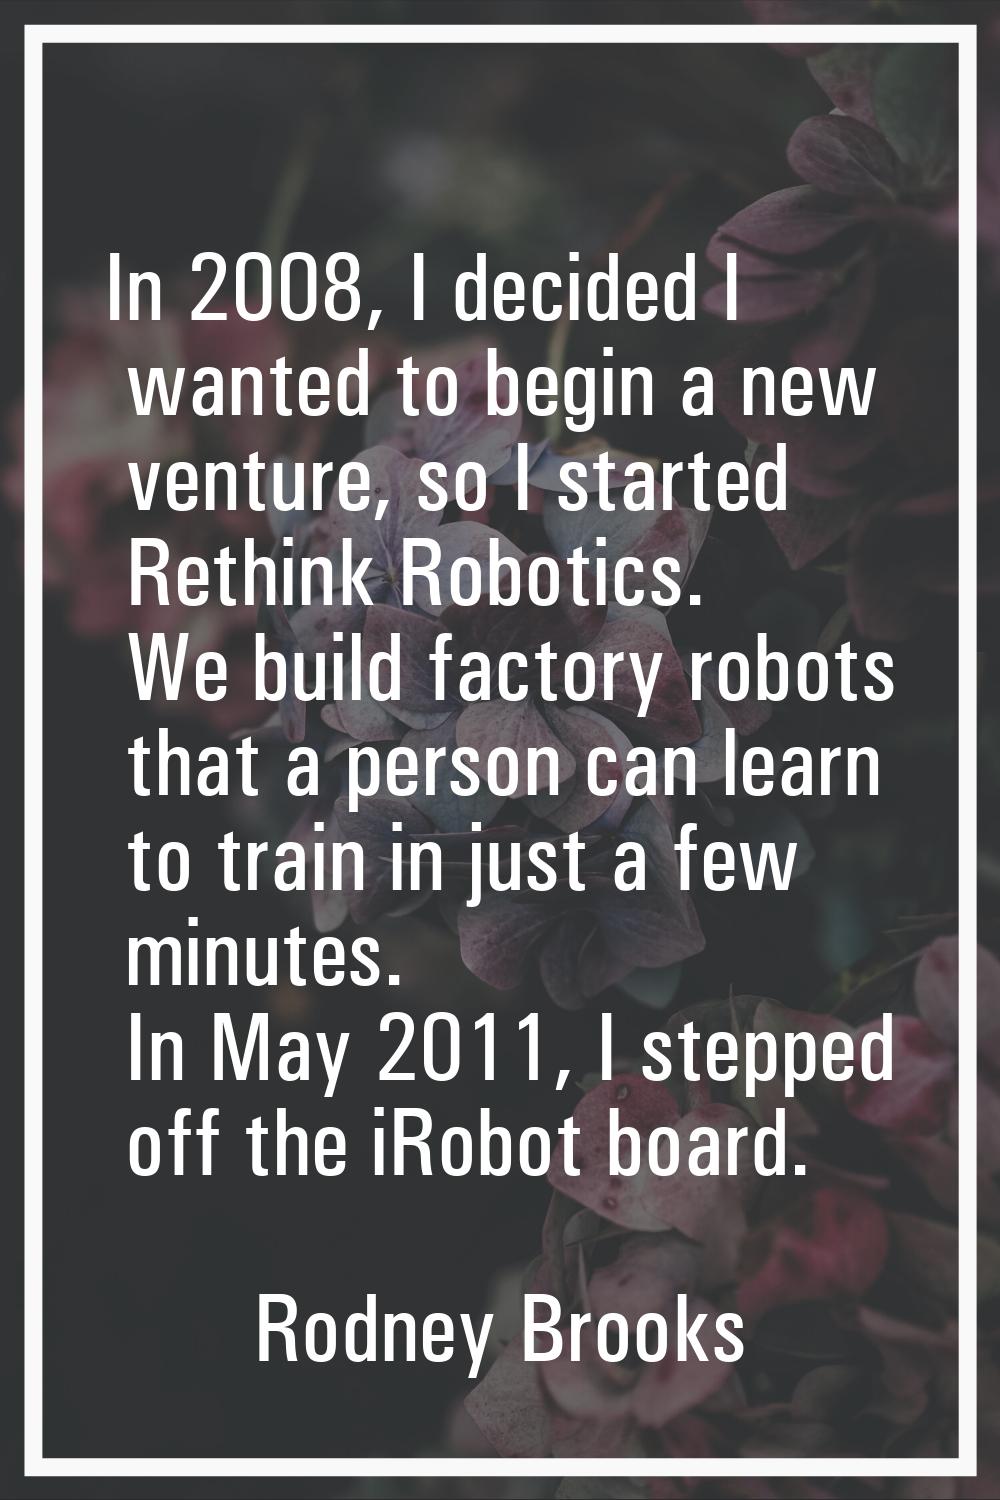 In 2008, I decided I wanted to begin a new venture, so I started Rethink Robotics. We build factory